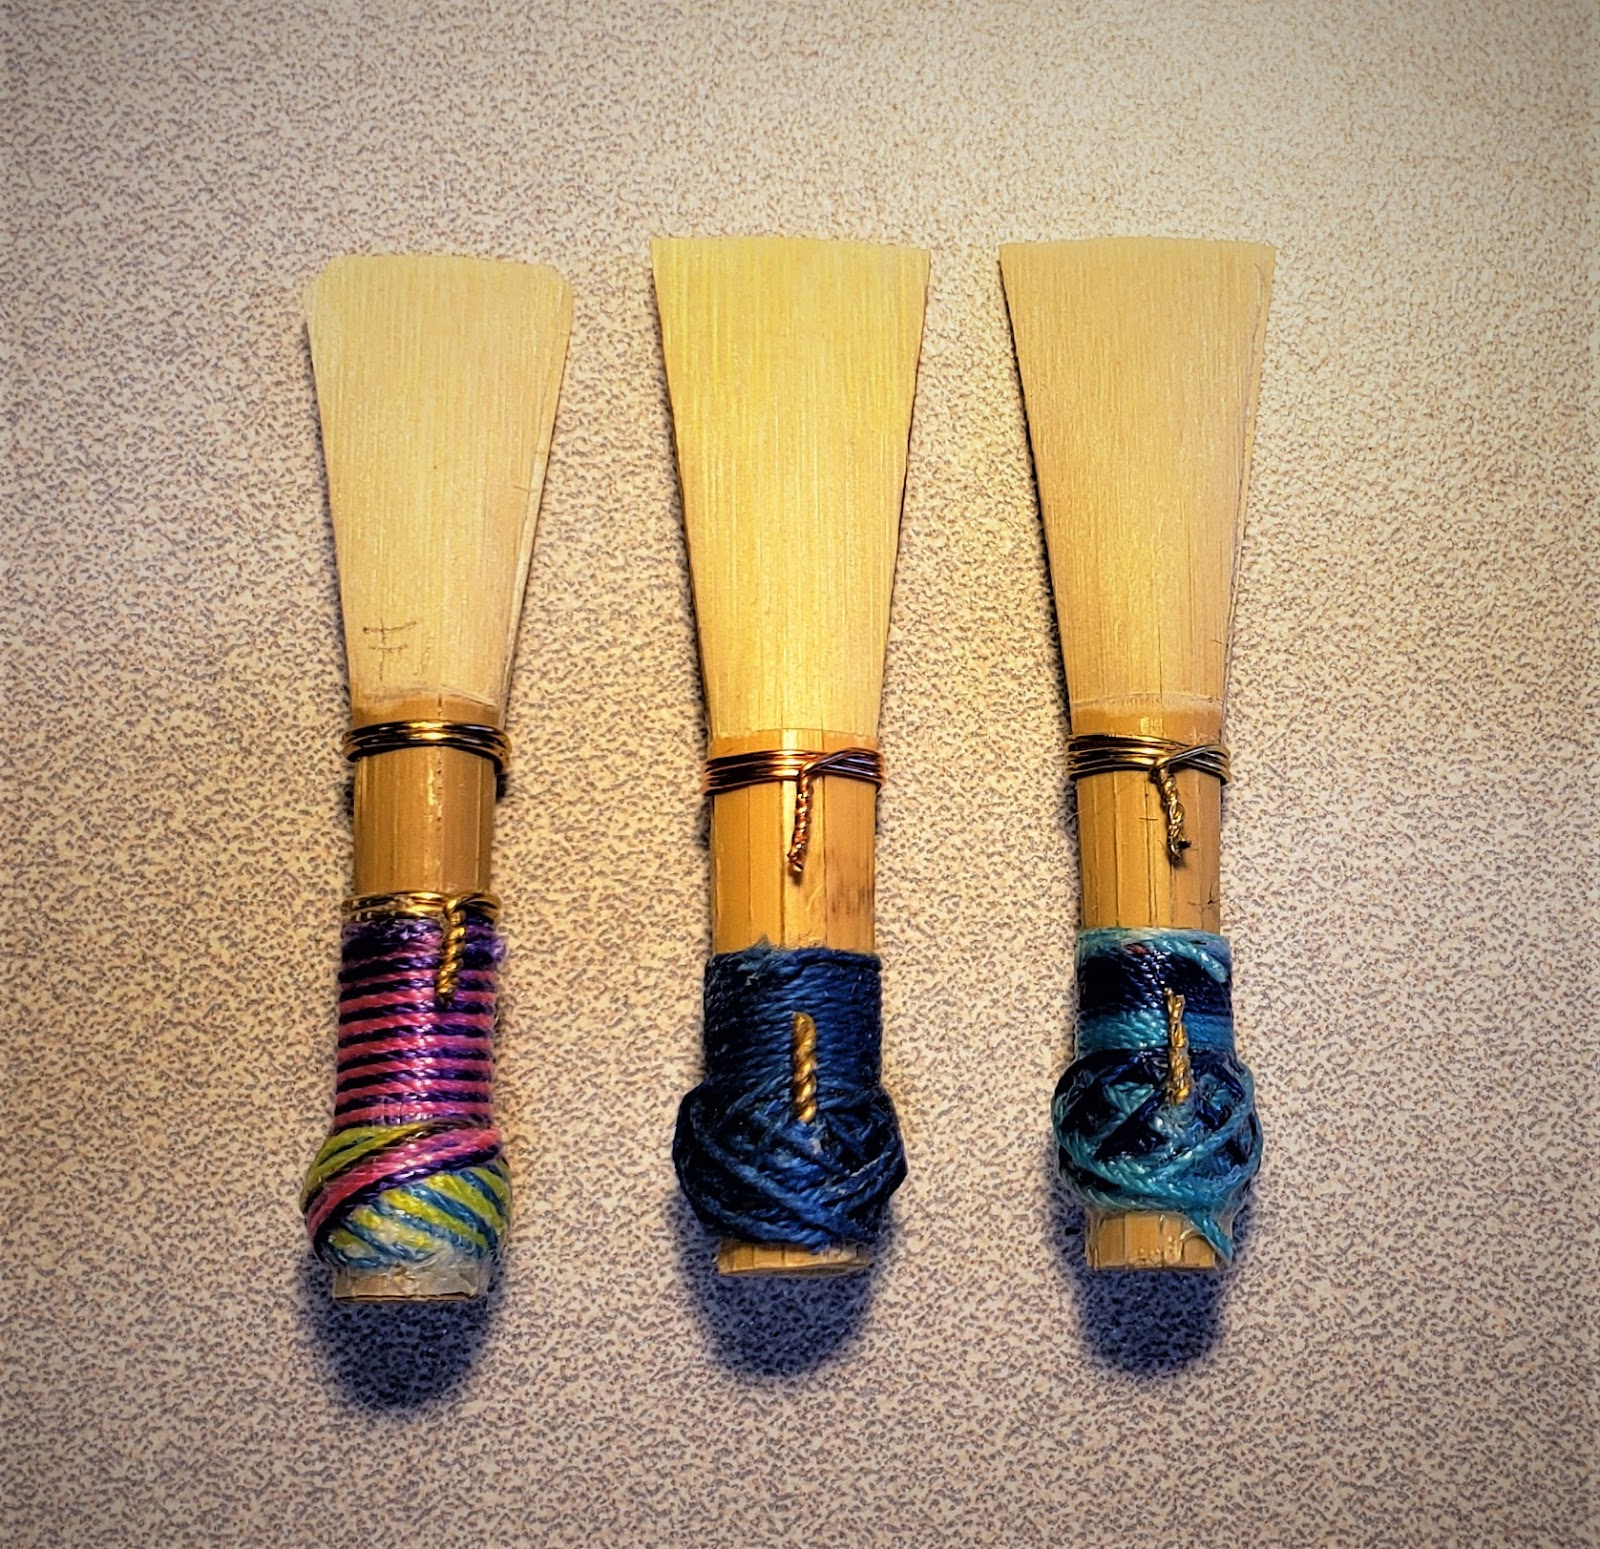 Bassoon With a View: How I Make Reeds: 2-wire reeds